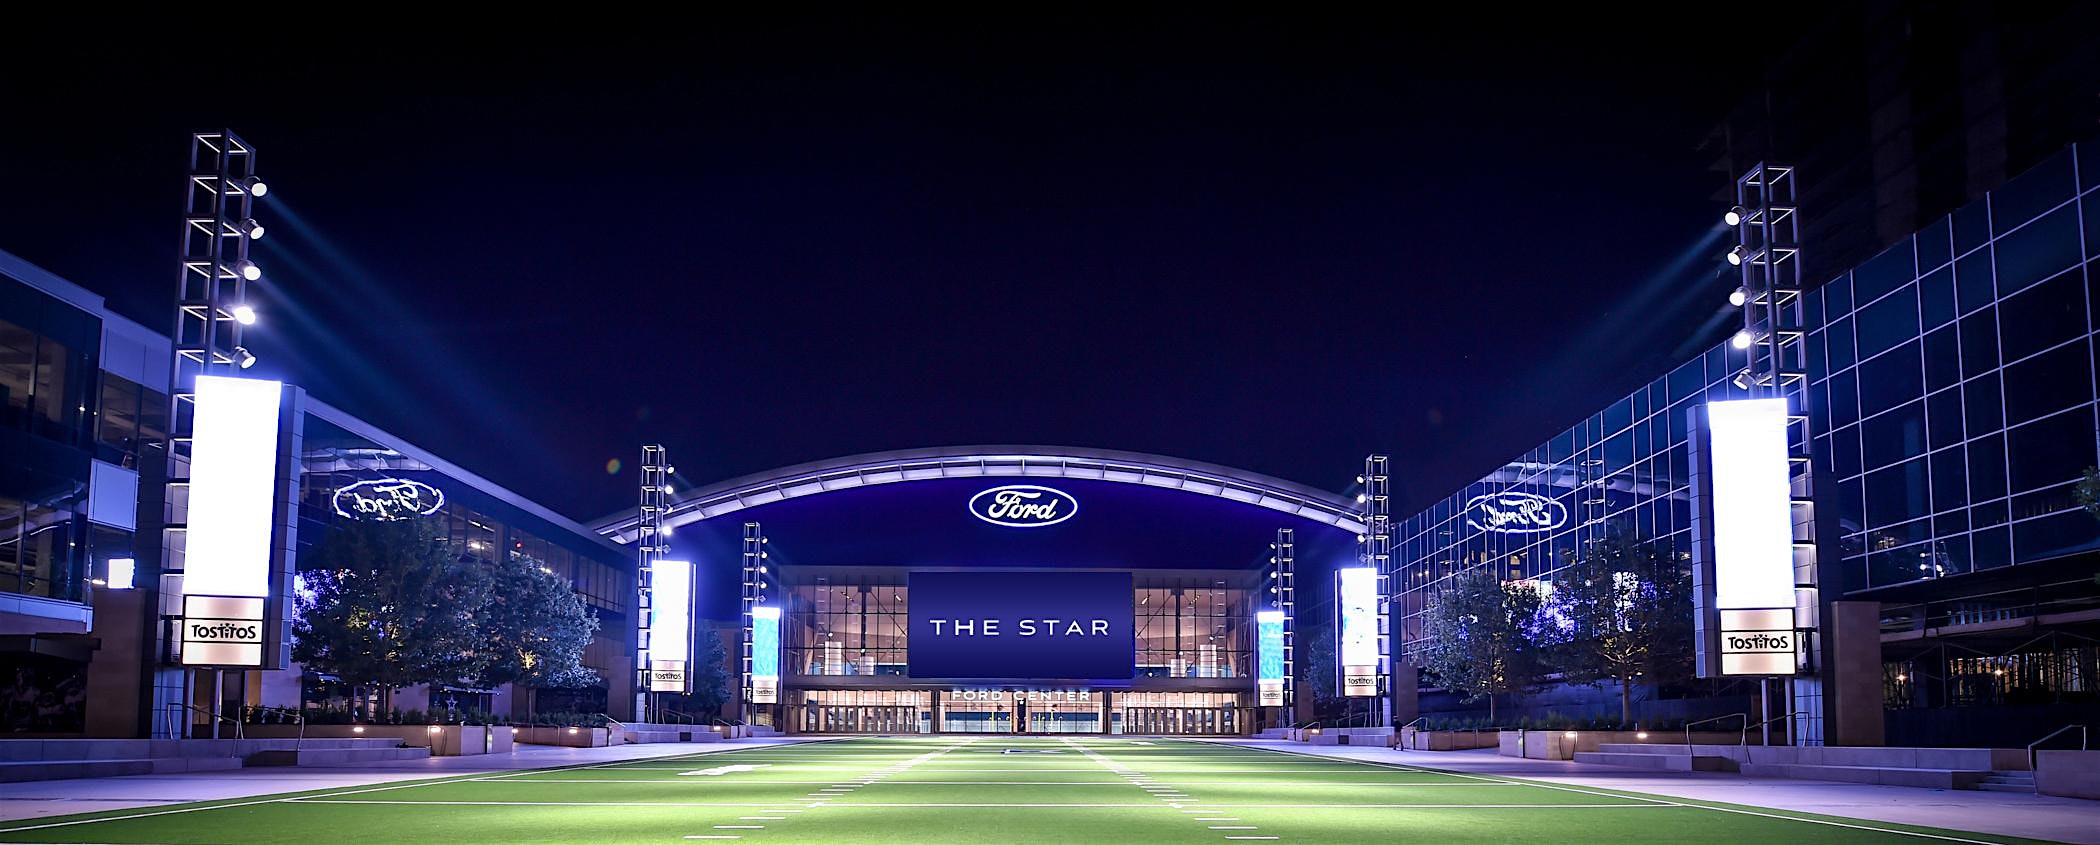 THE DREAM ALL-AMERICAN BOWL AT THE STAR IN FRISCO- THE DALLAS COWBOYS HQ